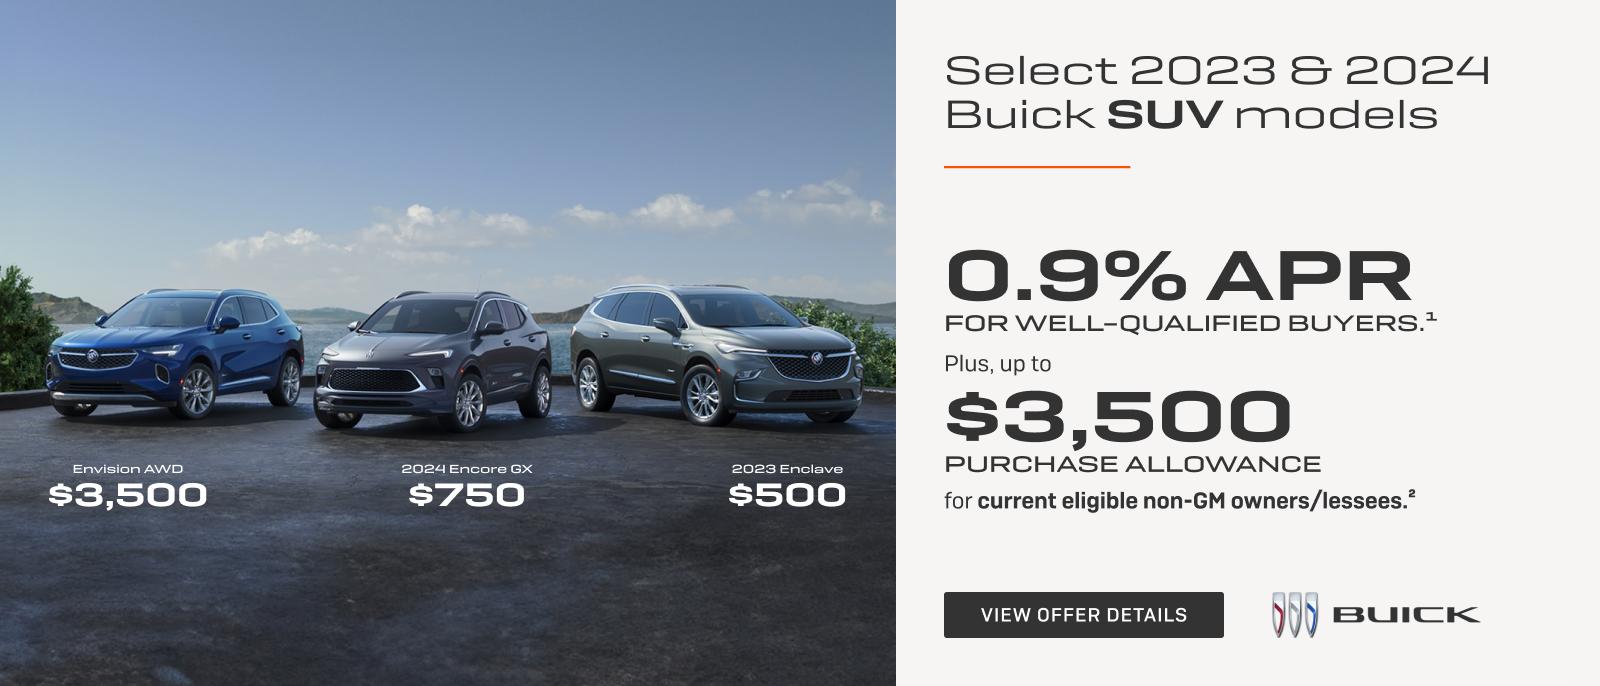 0.9% APR 
FOR WELL-QUALIFIED BUYERS.1

Plus, up to $3,500 PURCHASE ALLOWANCE for current eligible non-GM owners/lessees.2